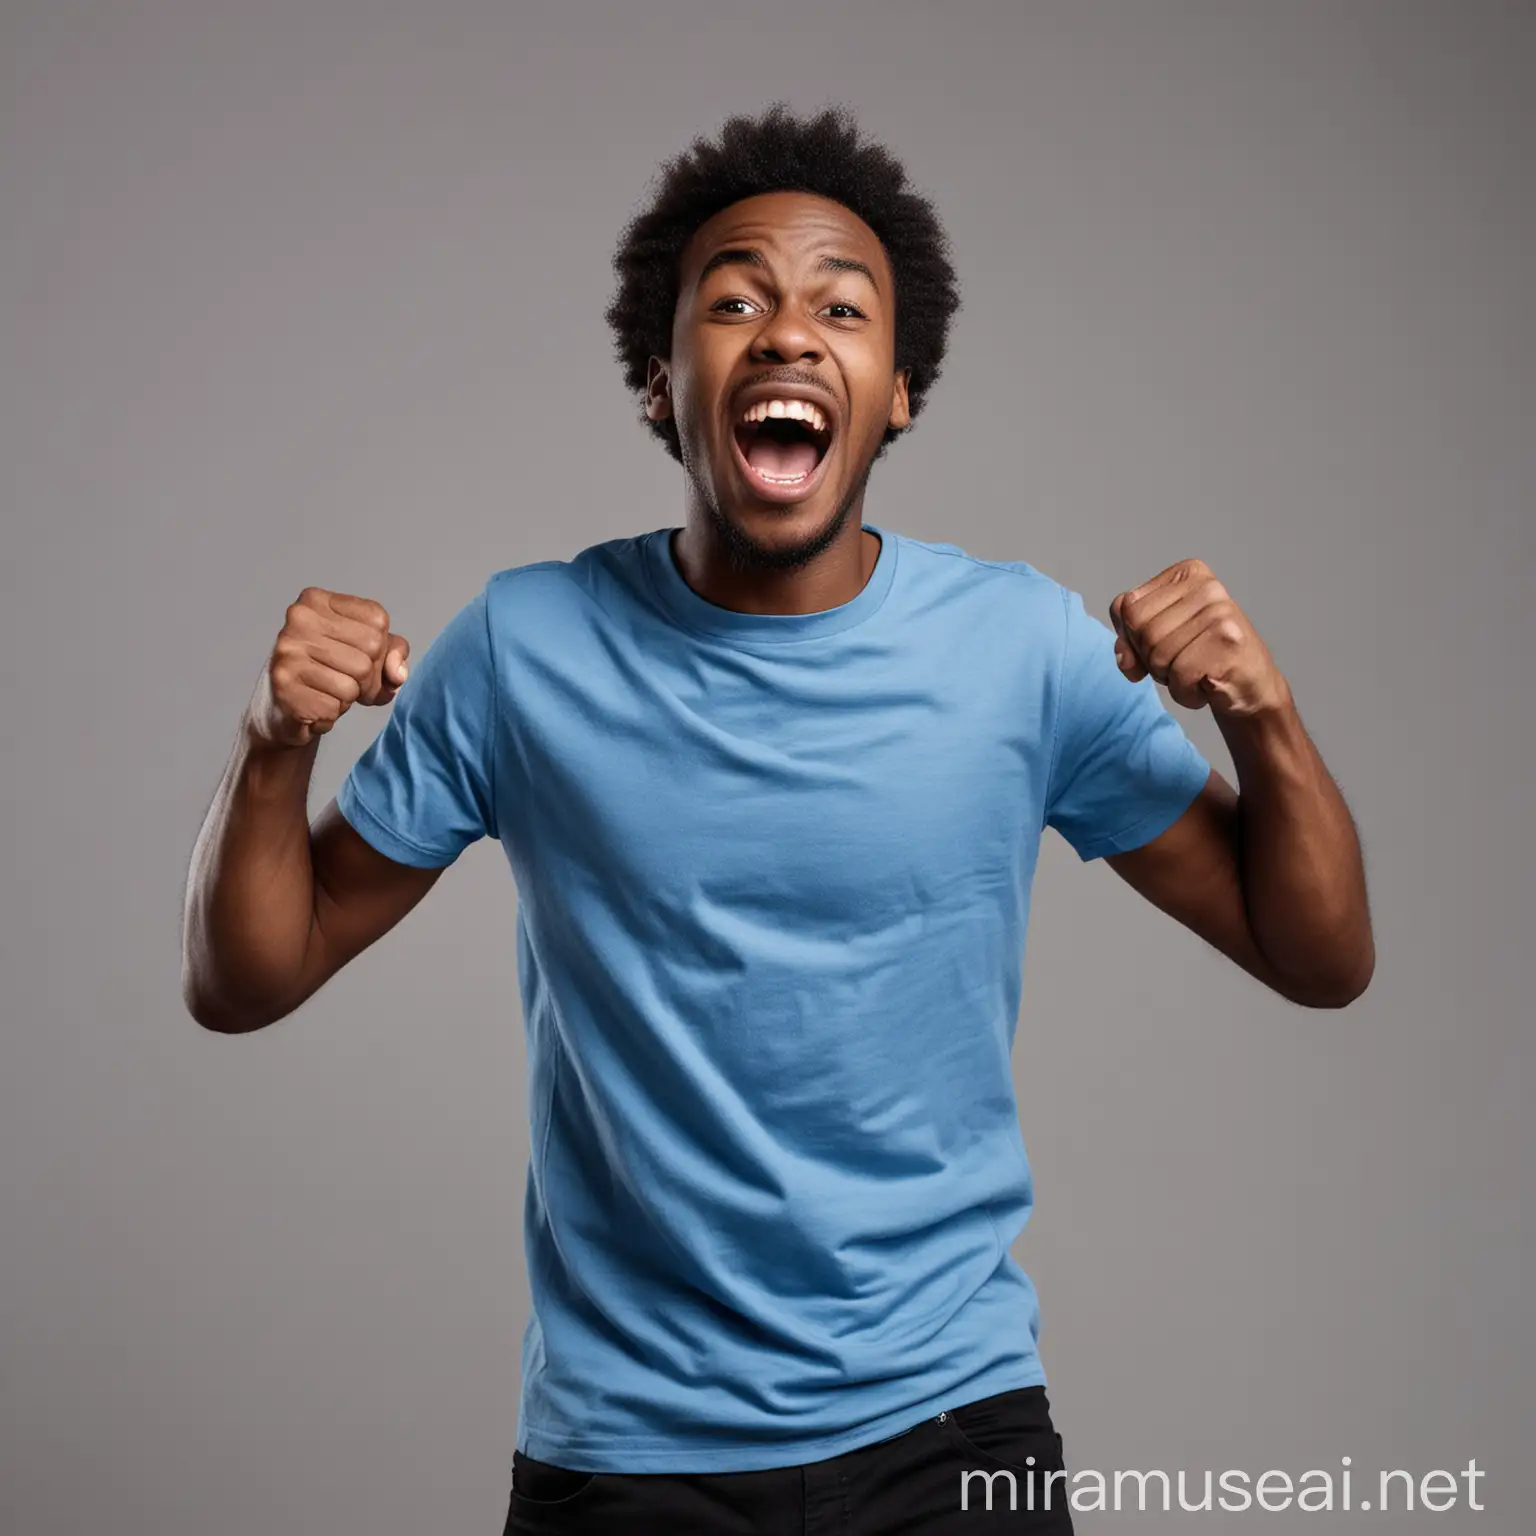 Excited African Man in Blue TShirt and Black Pants Celebrating Success